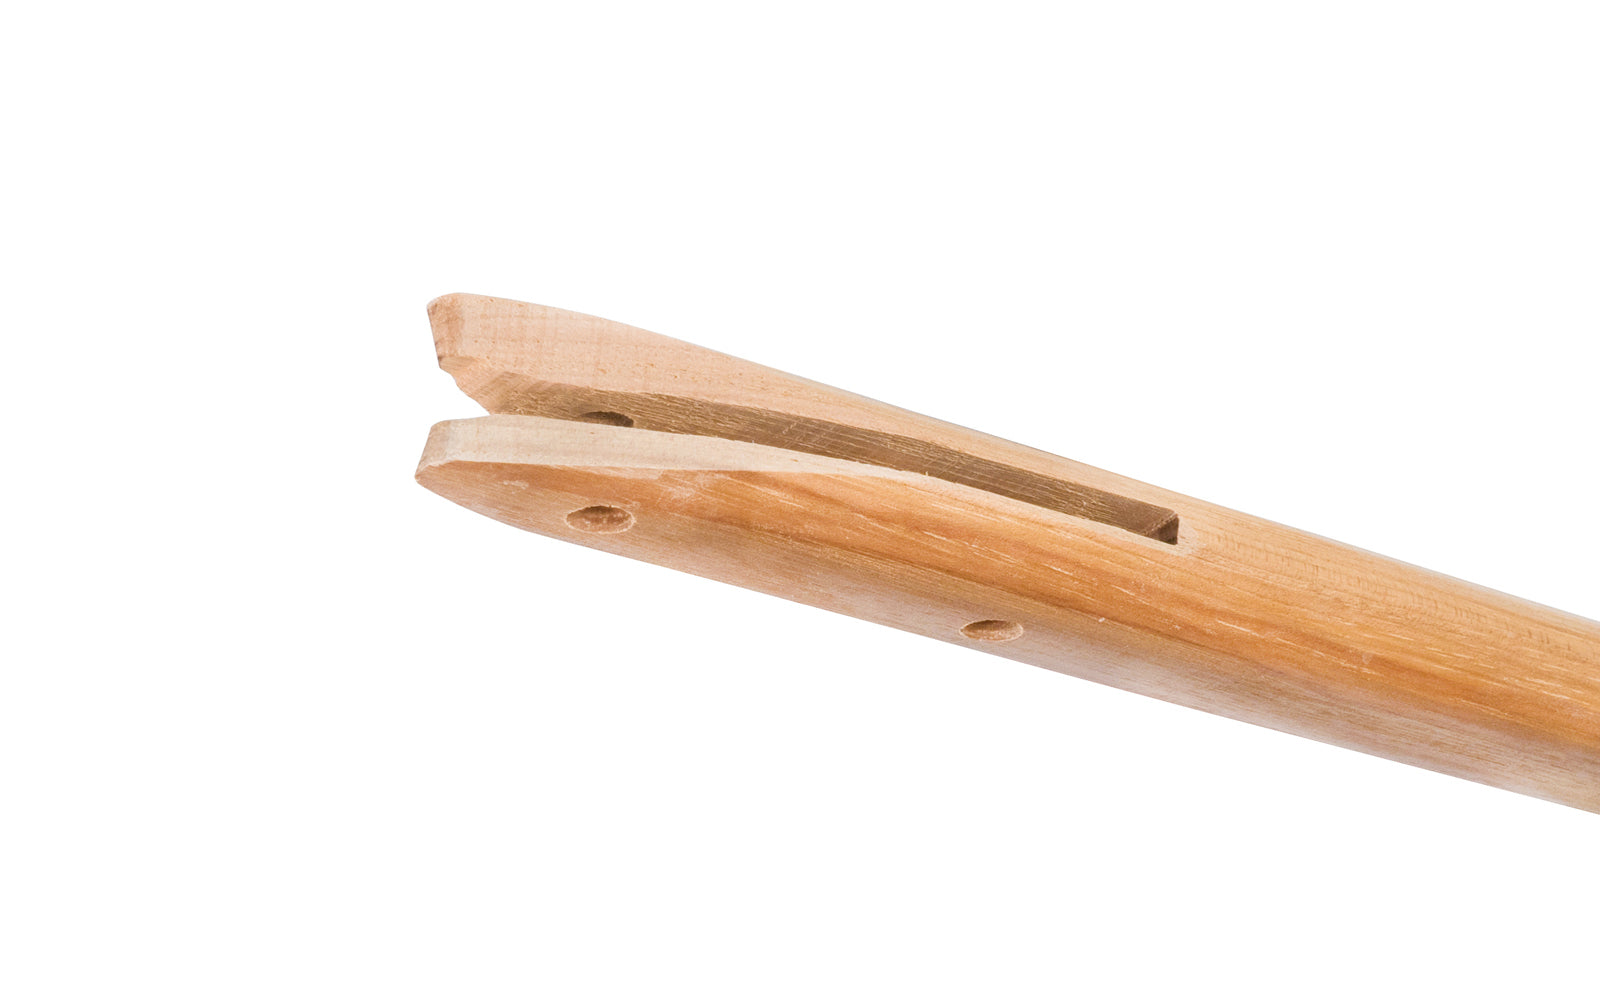 The Dalluge 03800 replacement handle is a sleek 15-1/2" straight, aerodynamically contoured handle made from top quality American hickory machine-gauged to precise balance, then double-sanded, buffed & lacquered to assure maximum comfort. 03800. Includes 2 male & 2 female patch screws, & two hex wrenches.  Vaughan & Bushnell Mfg.   Made in USA.